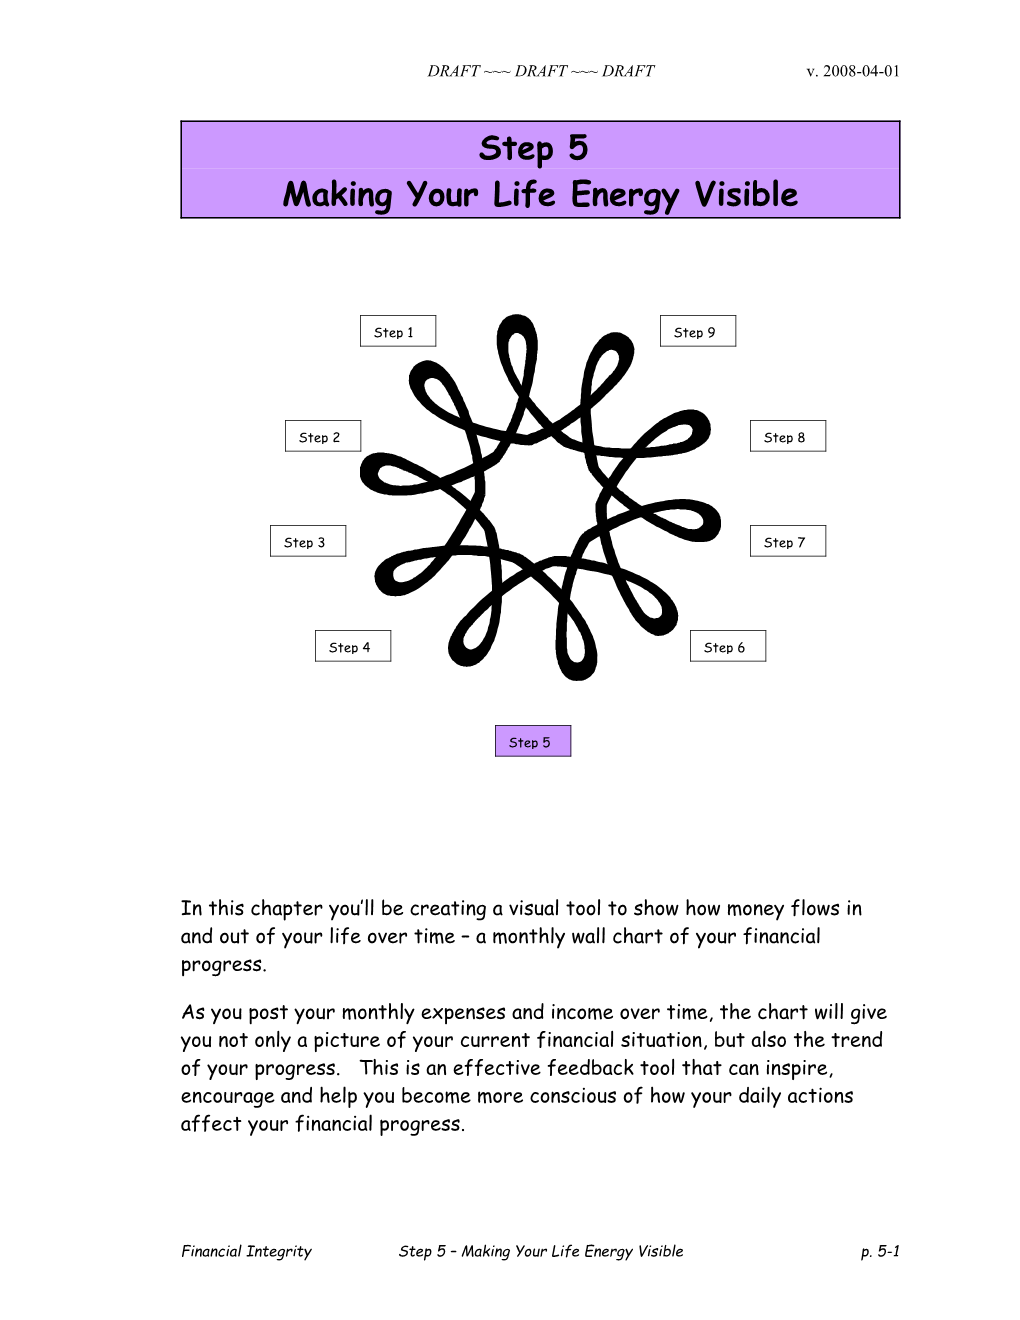 Making Your Life Energy Visible